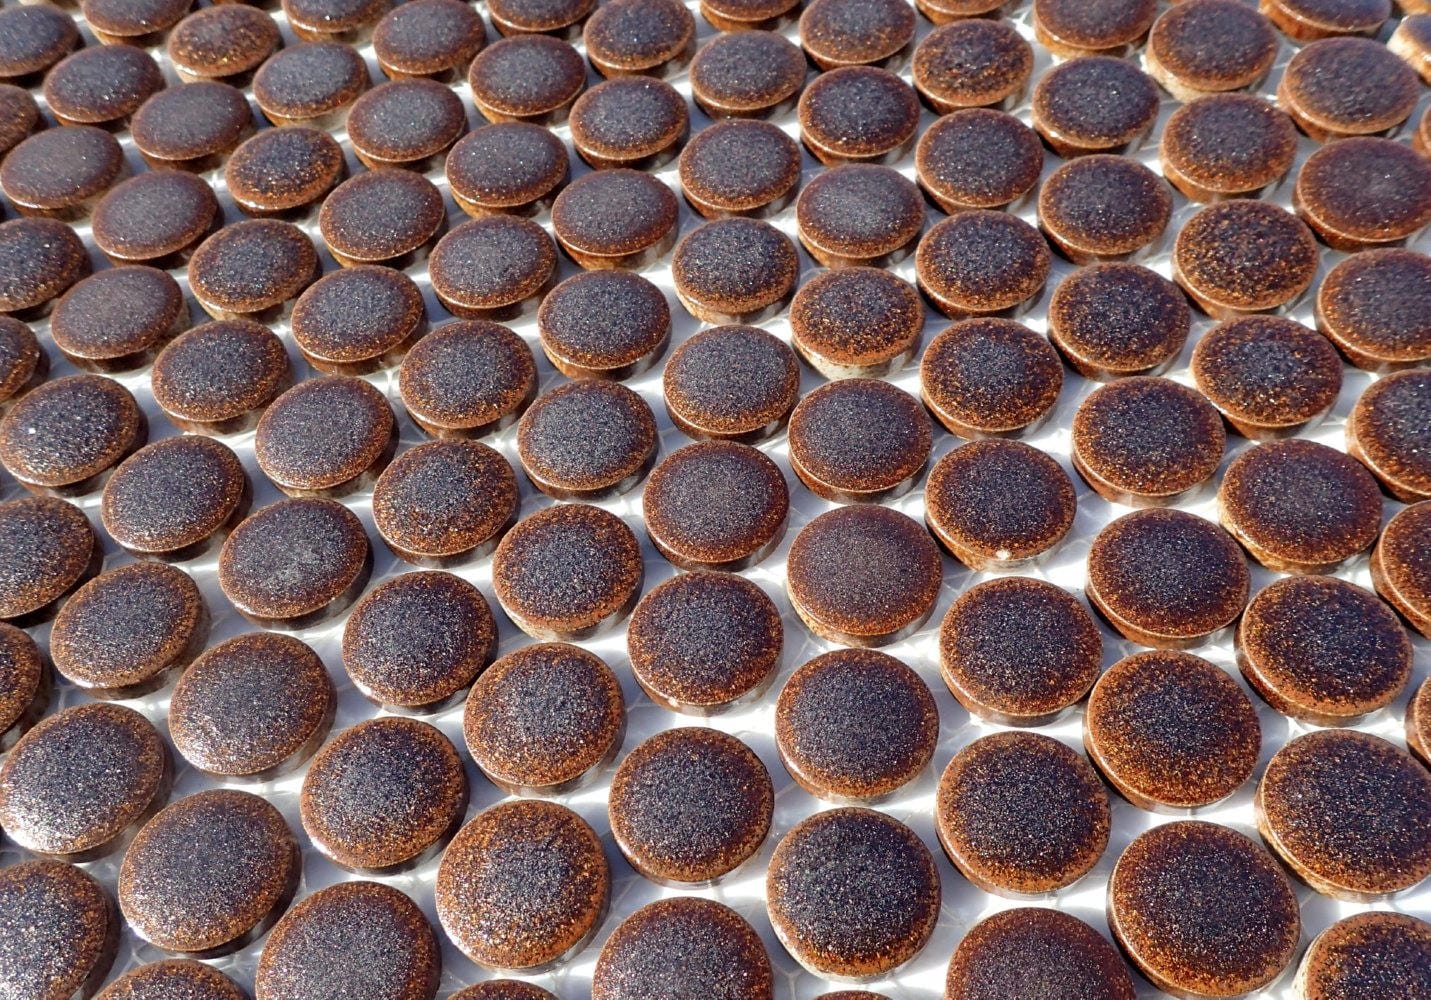 Bronze Ceramic Tiles - Round Mosaic Tiles - 2 cm or .75 inch - 25 Tiles - Penny Rounds